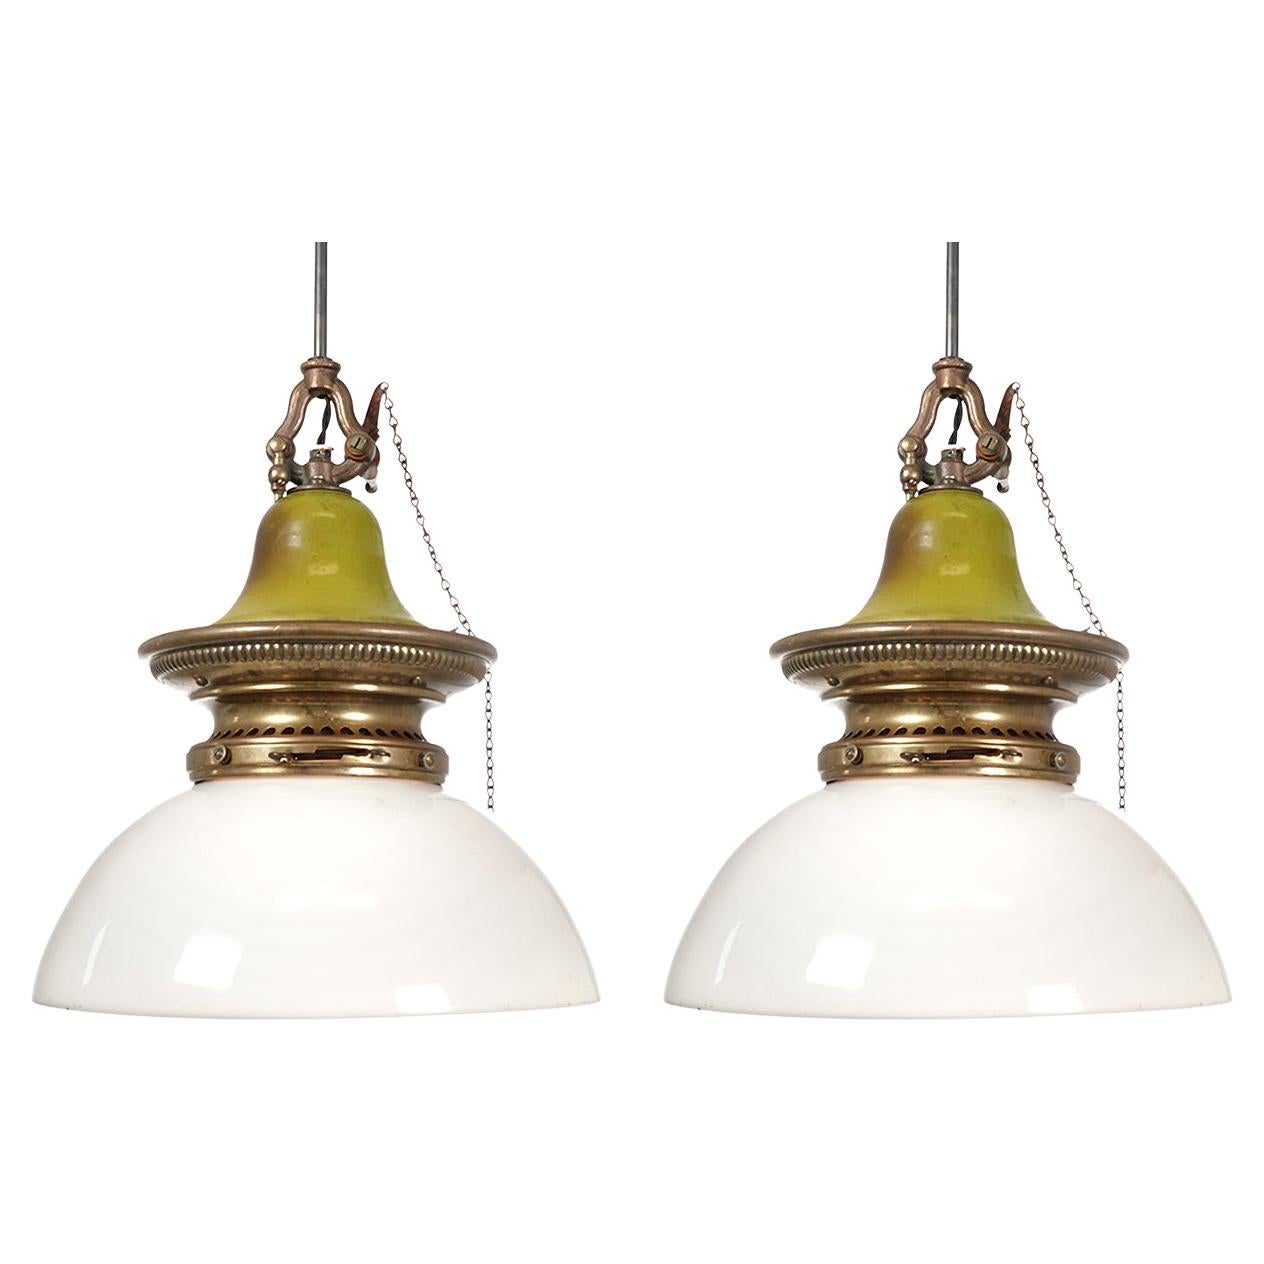 Unique Matching Pair of Domed Humphrey Lamps